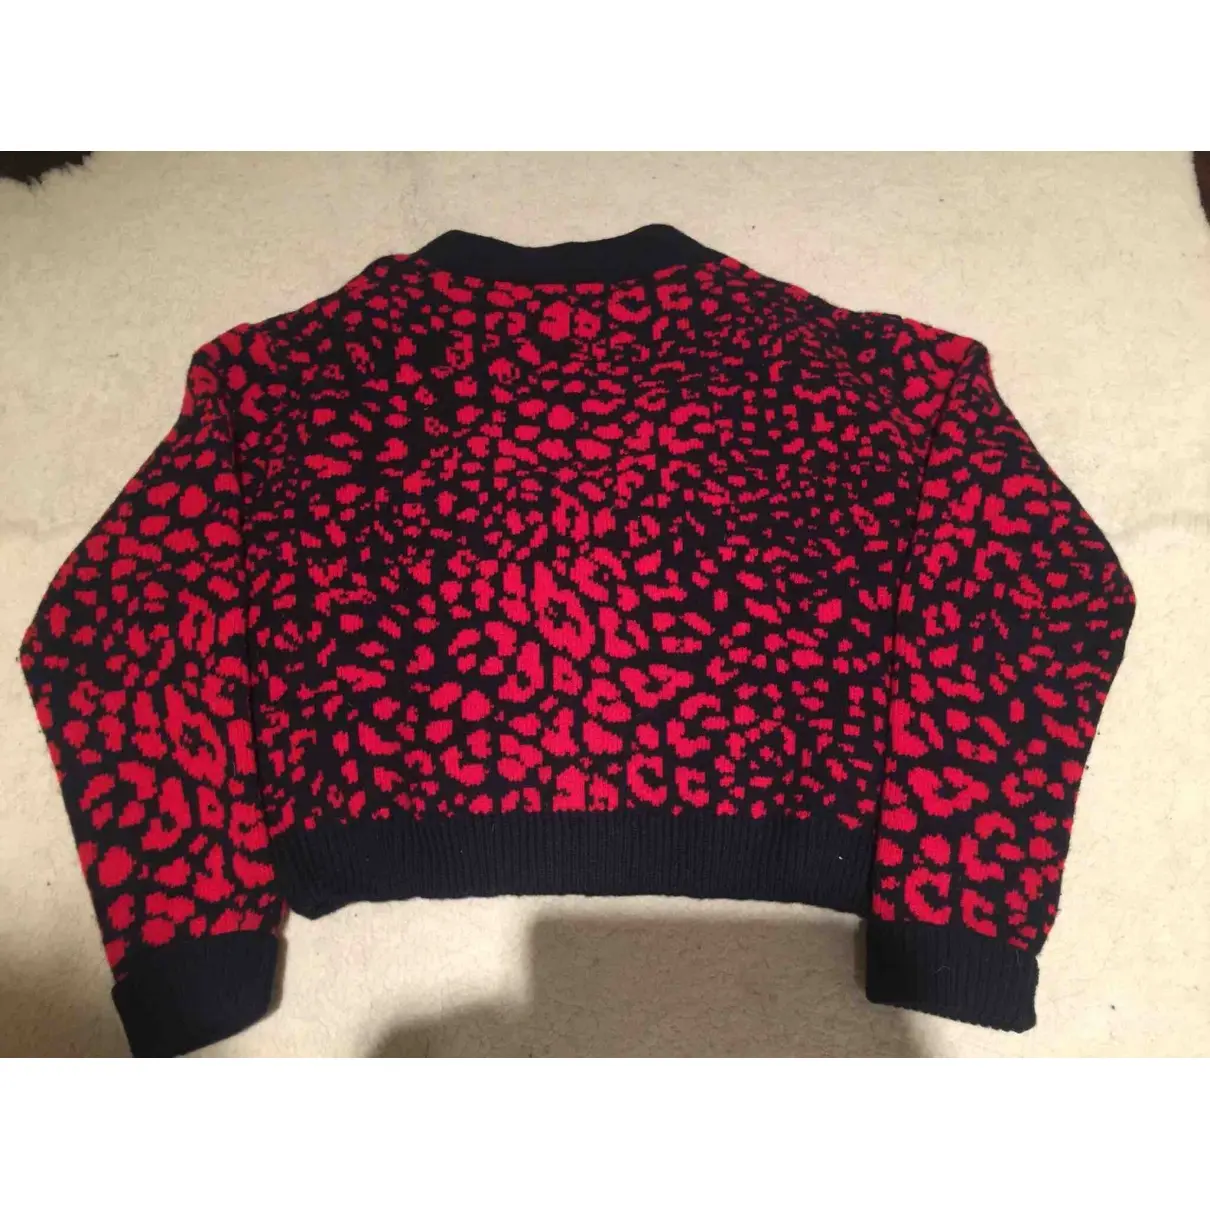 Department 5 Wool jumper for sale